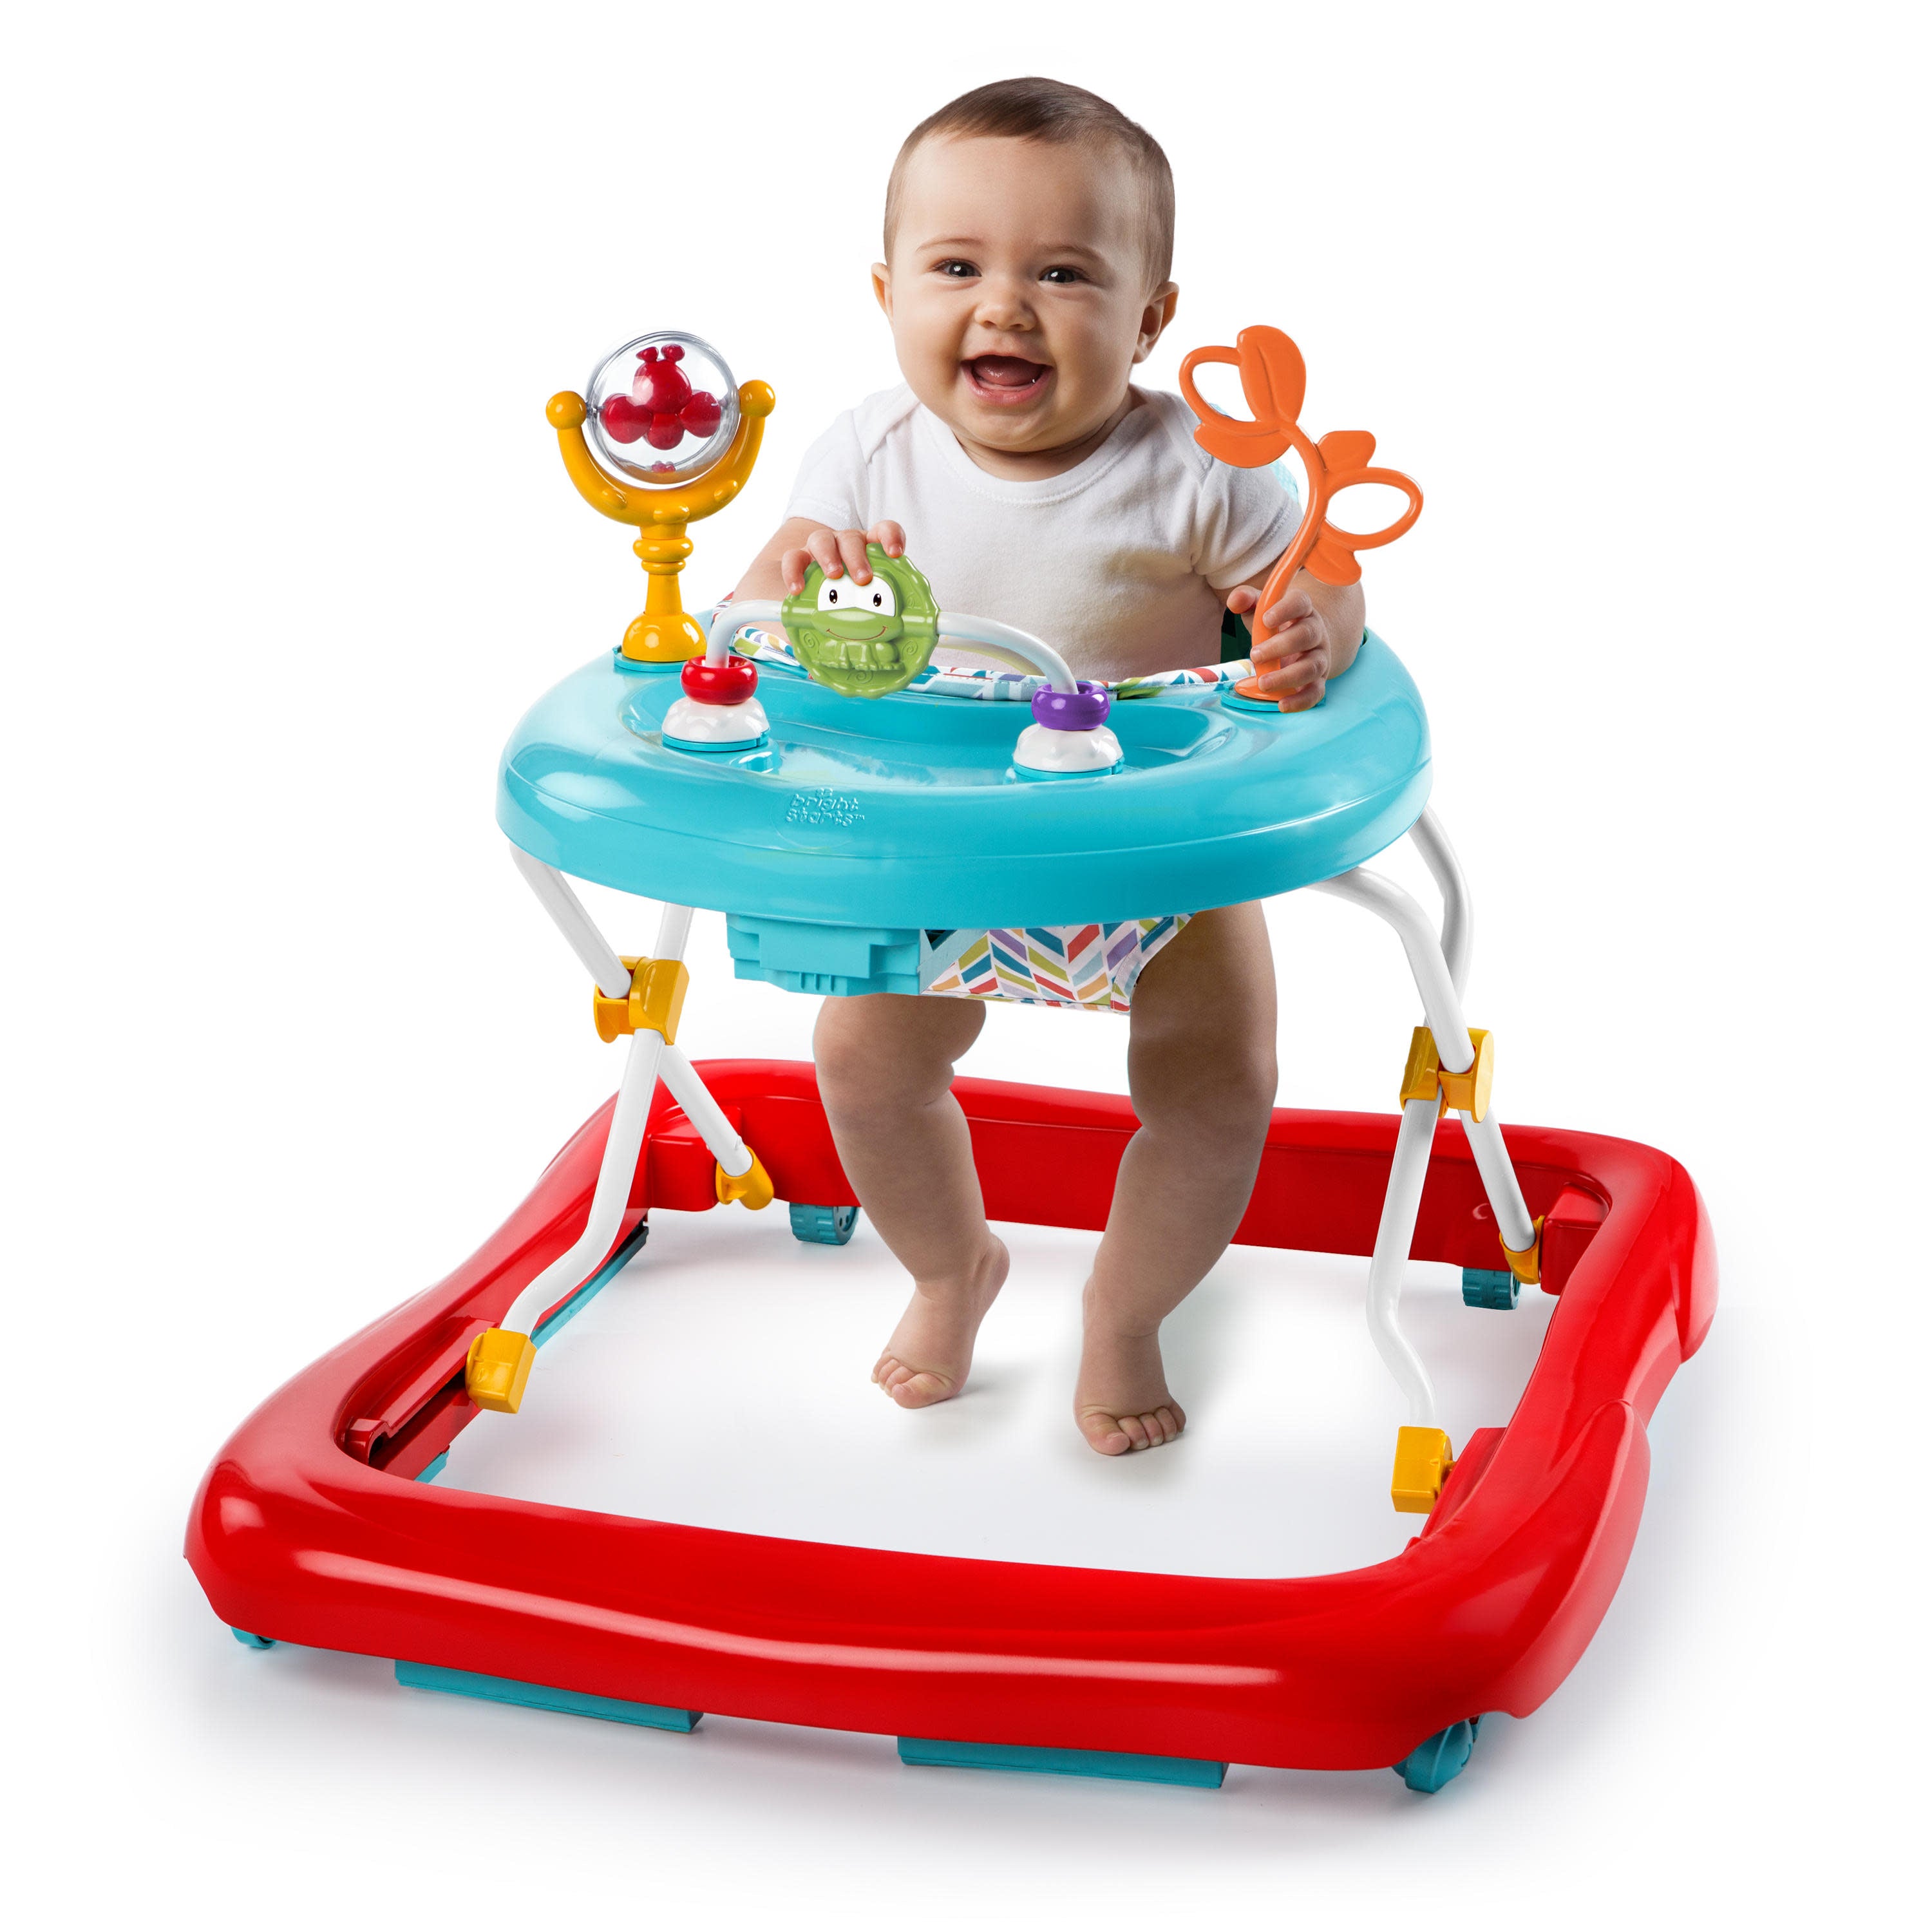  Bright Starts JuneBerry Walk-A-Bout Walker with Easy Fold  Frame for Storage, Ages 6 months + : Baby Walkers : Baby